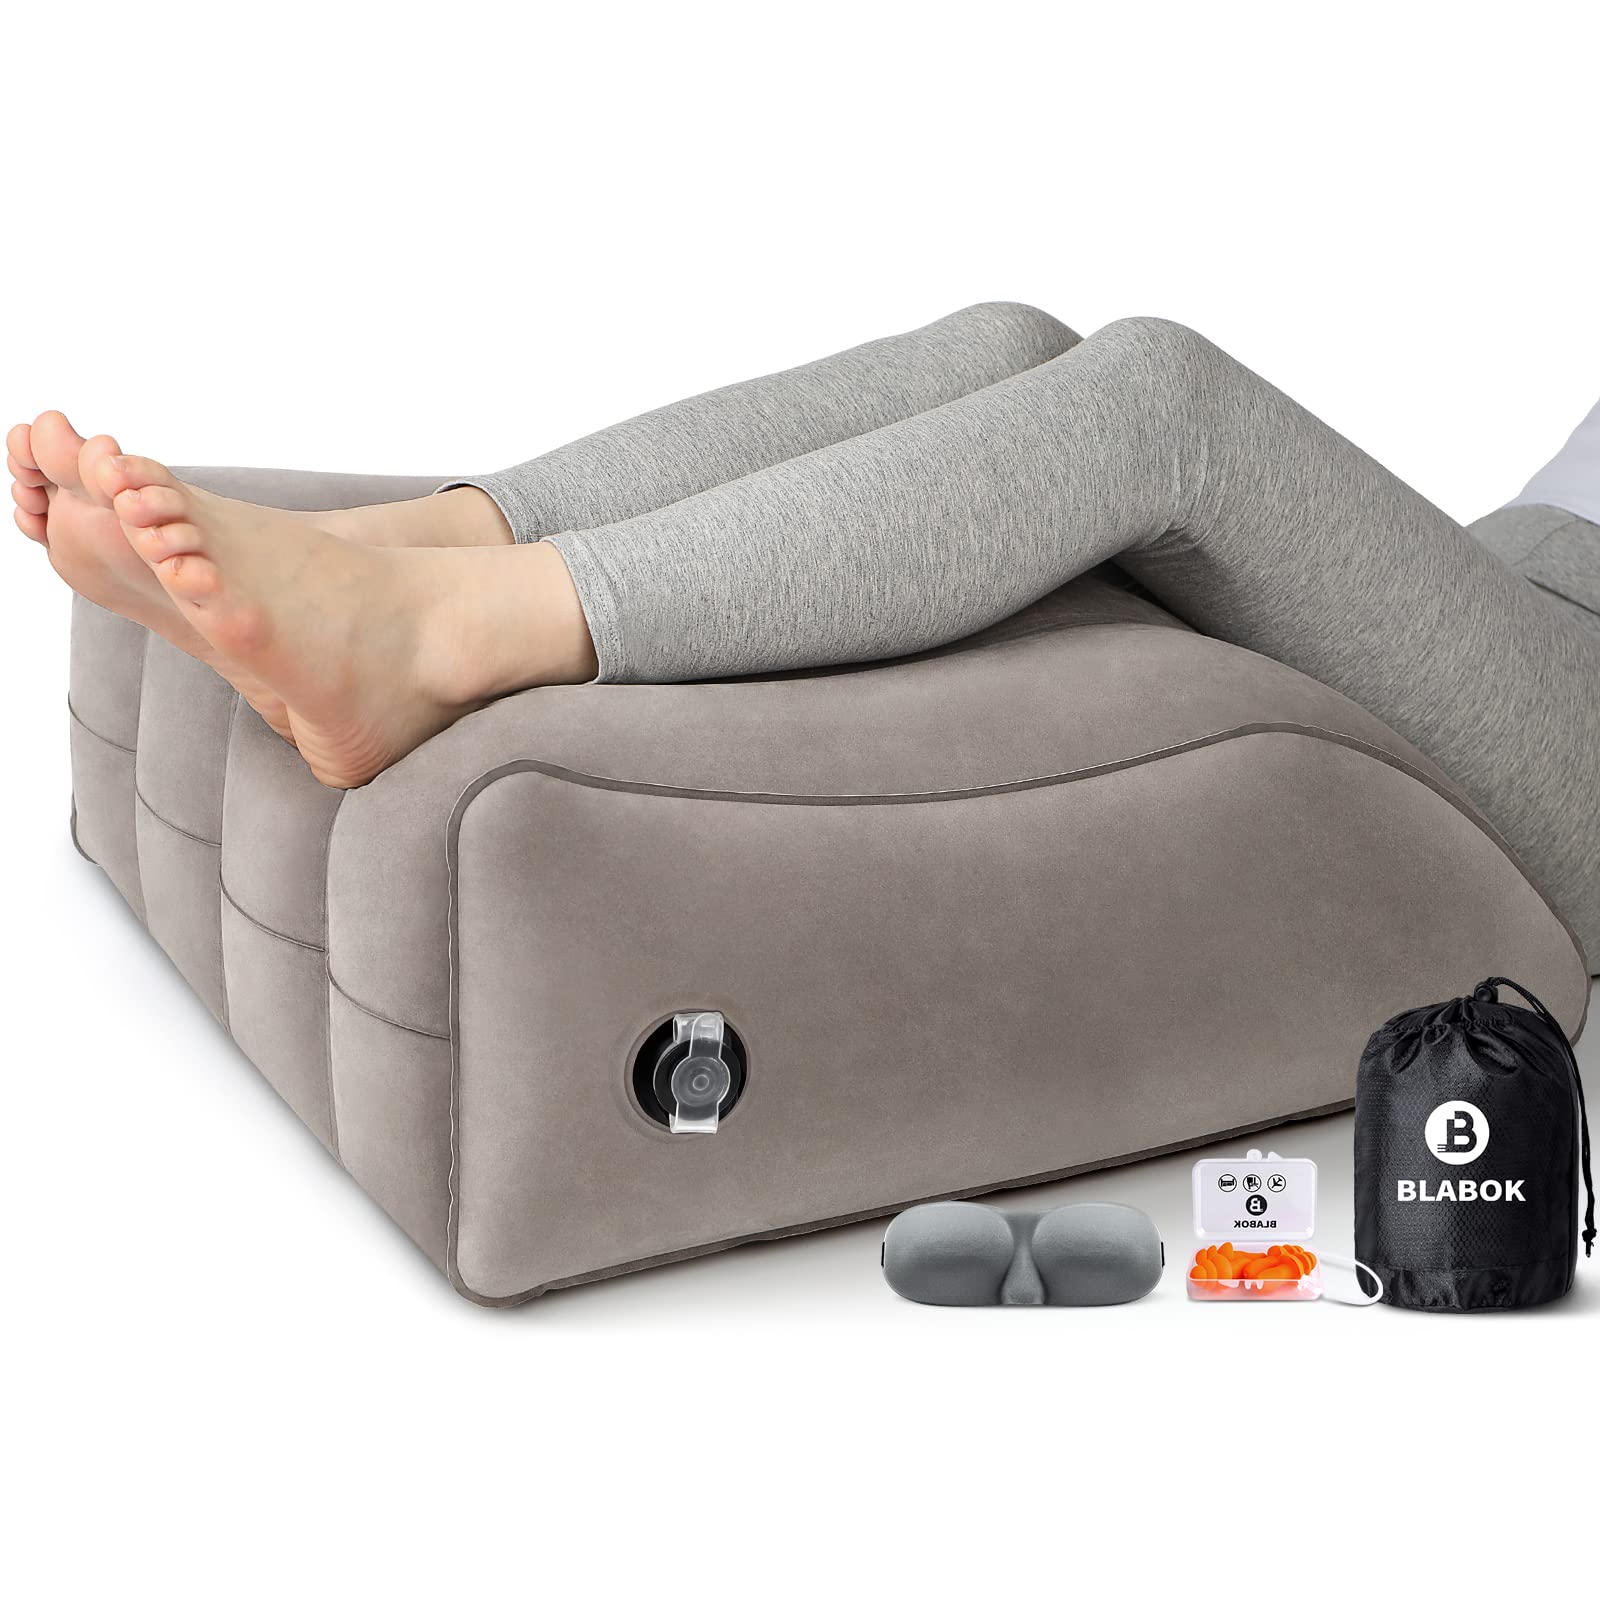 Leg Elevation Pillows, Inflatable Wedge Pillows for Sleeping, Comfort Leg  Pillows Improve Circulation, Suitable for Relax Muscles & Comfort Swelling,  Pregnant, Recovery 